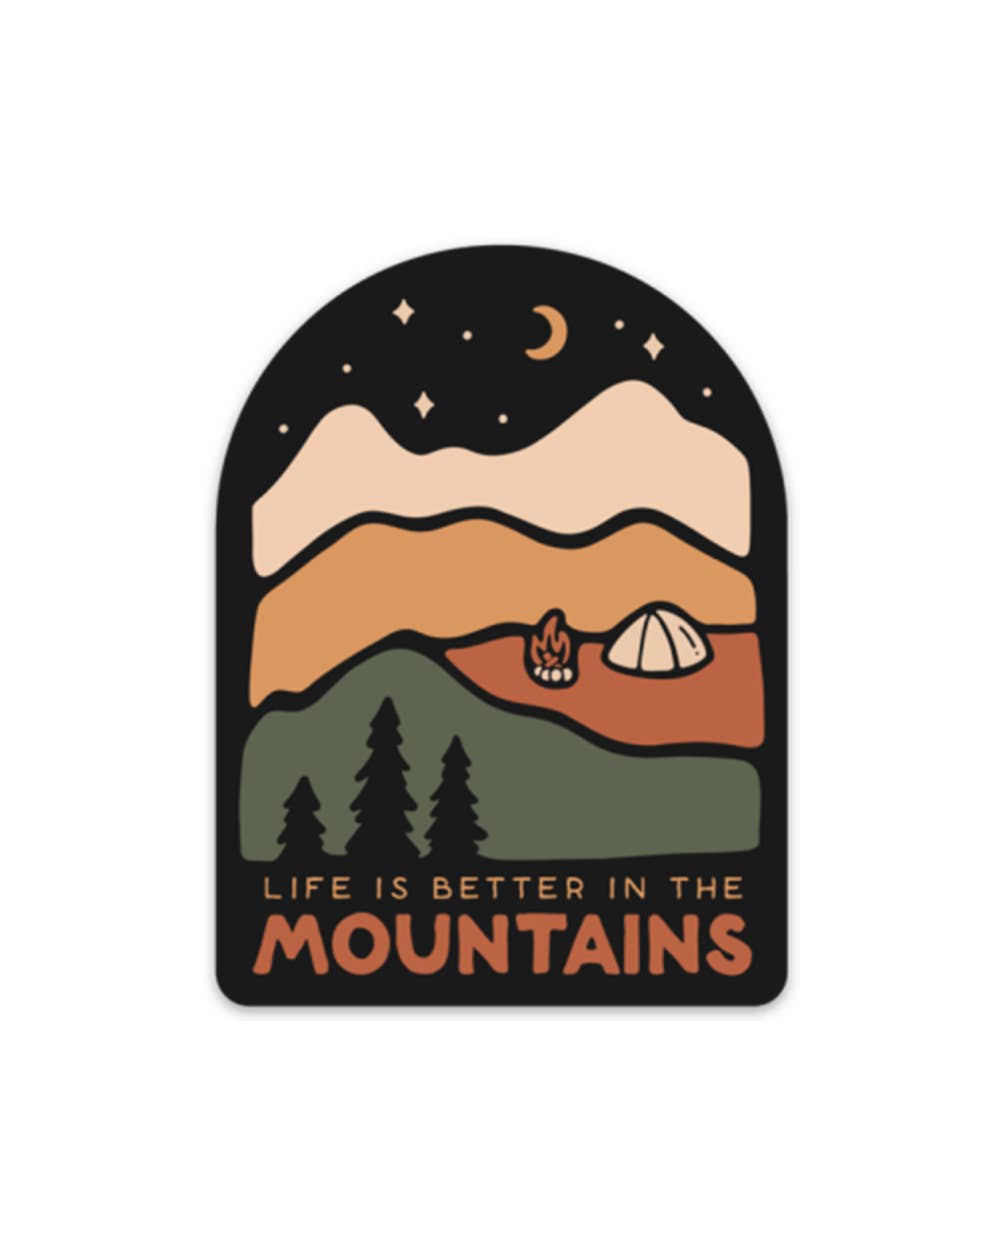 Life is better in the mountains nighttime scene sticker by Keep Nature Wild